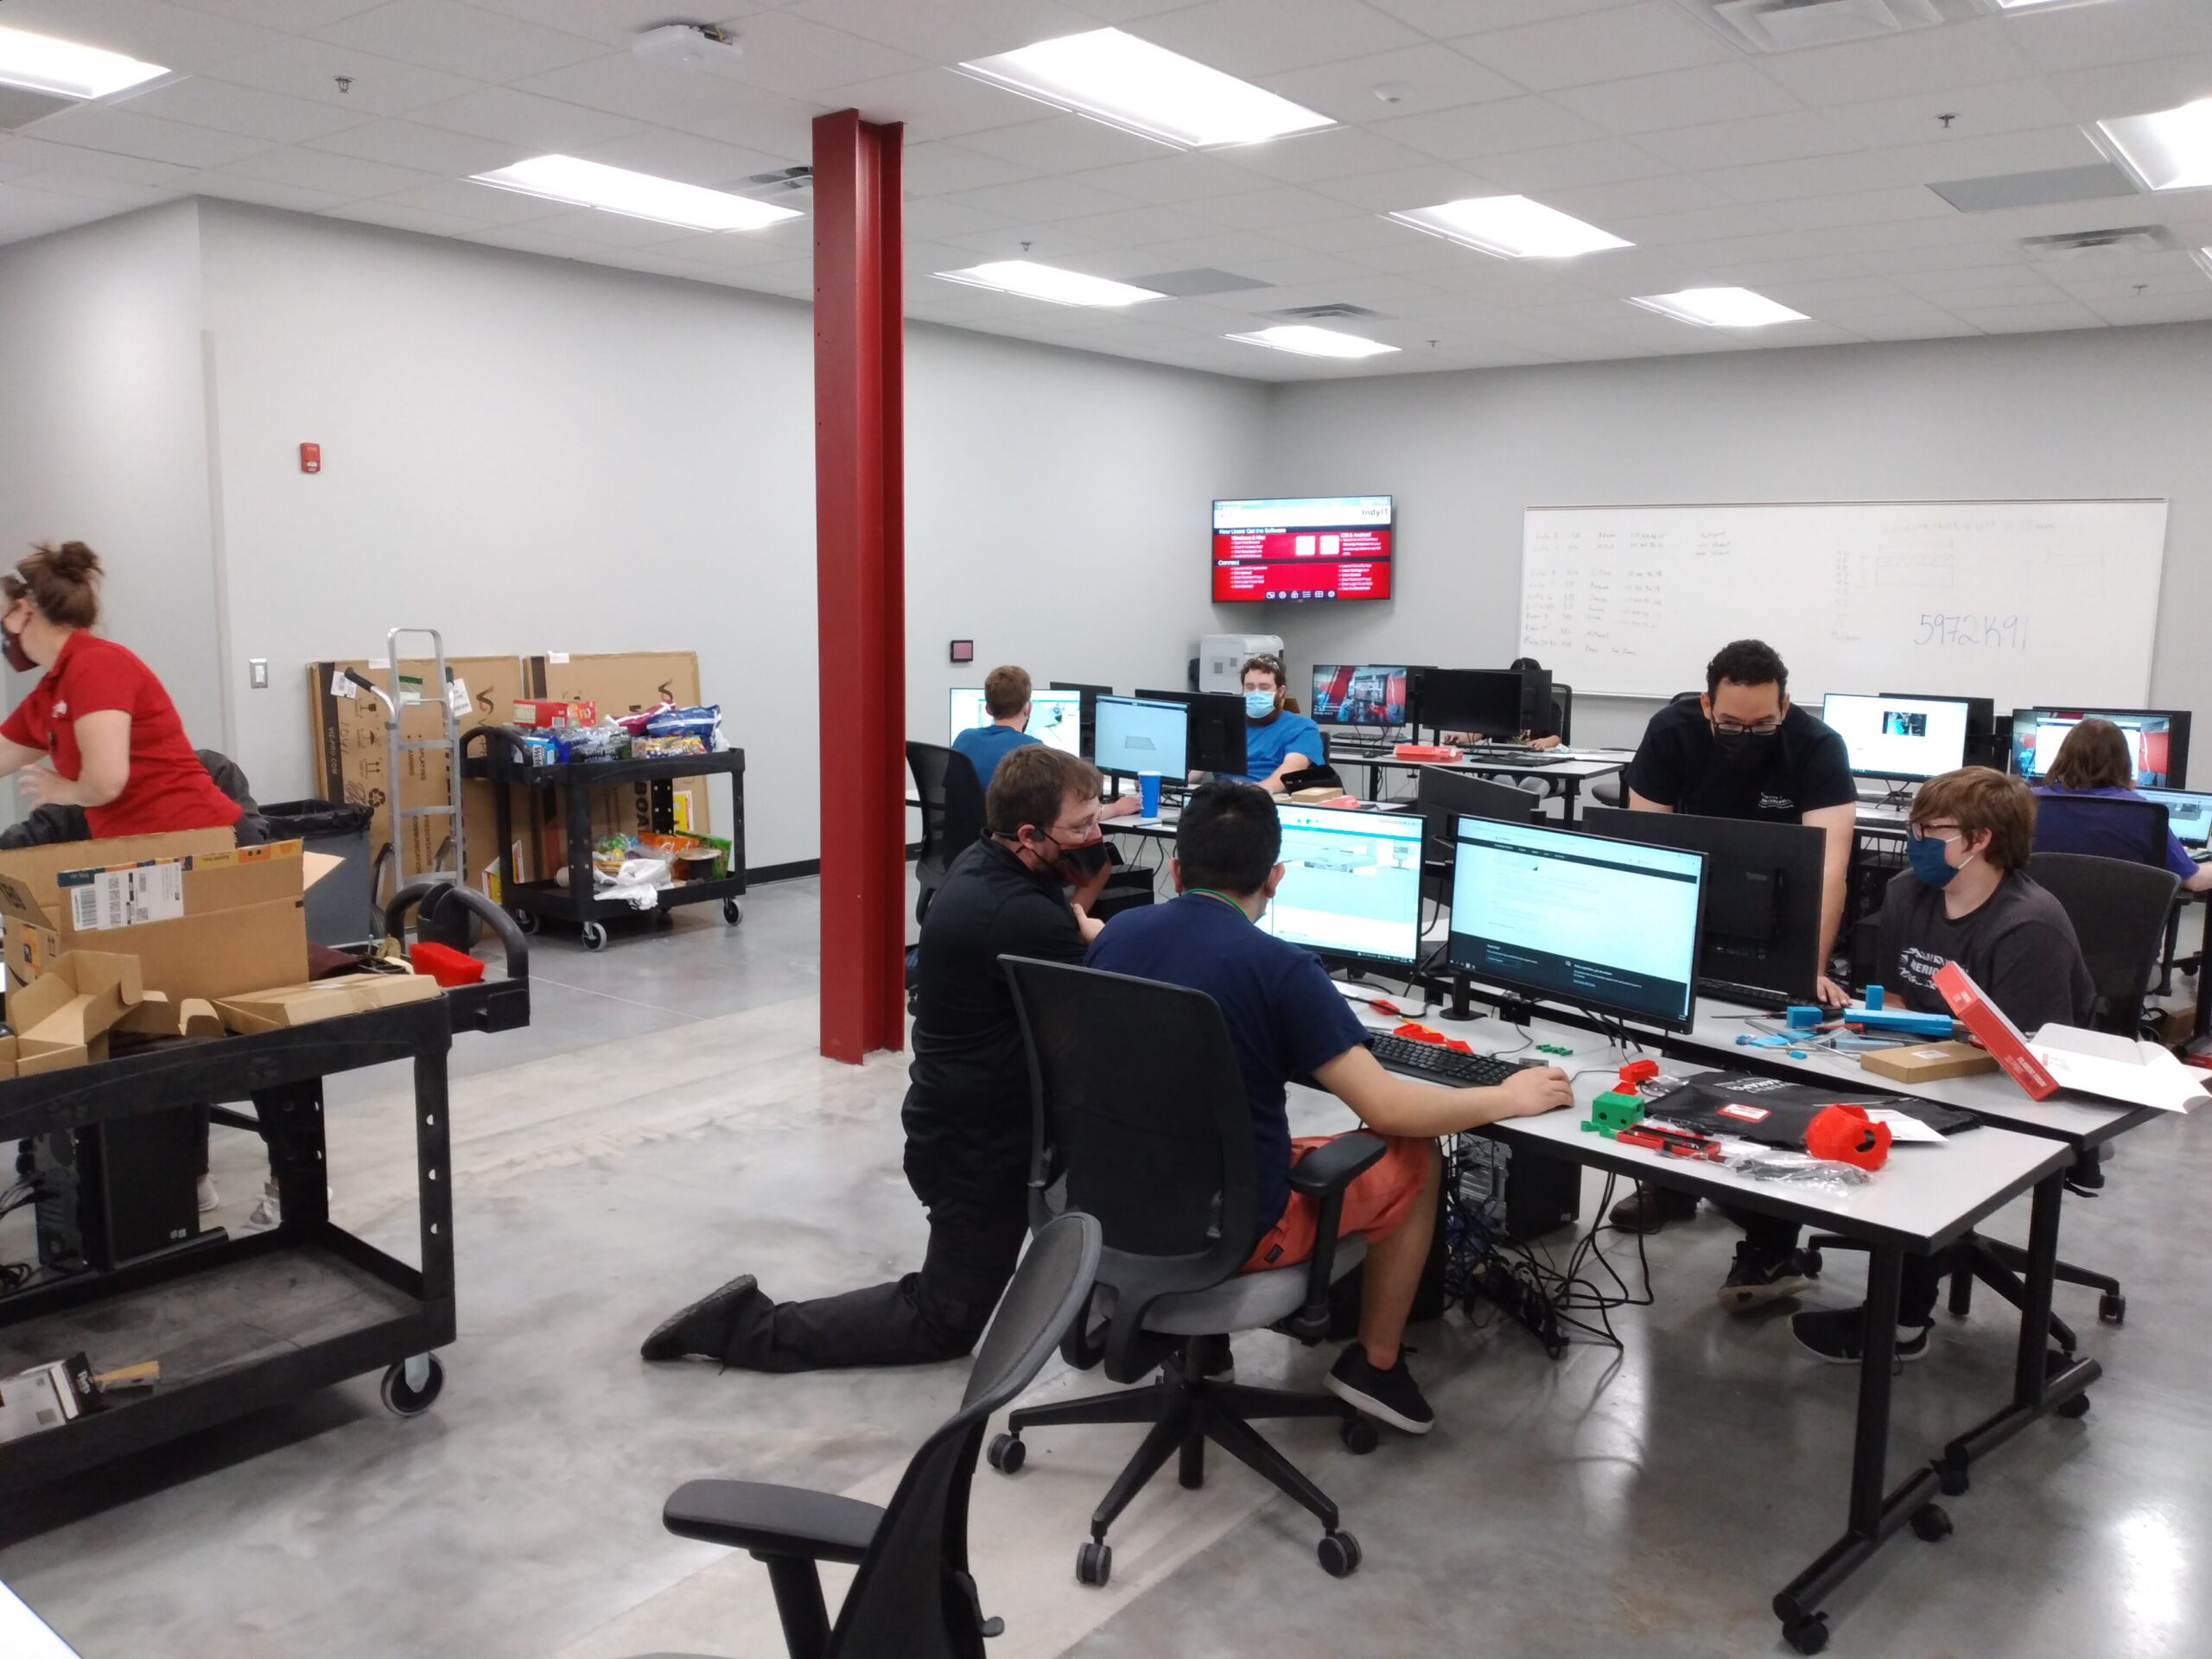 2021 UIndy Engineering 3D Printing Summer Camp: Developing the Next Generation of Makers